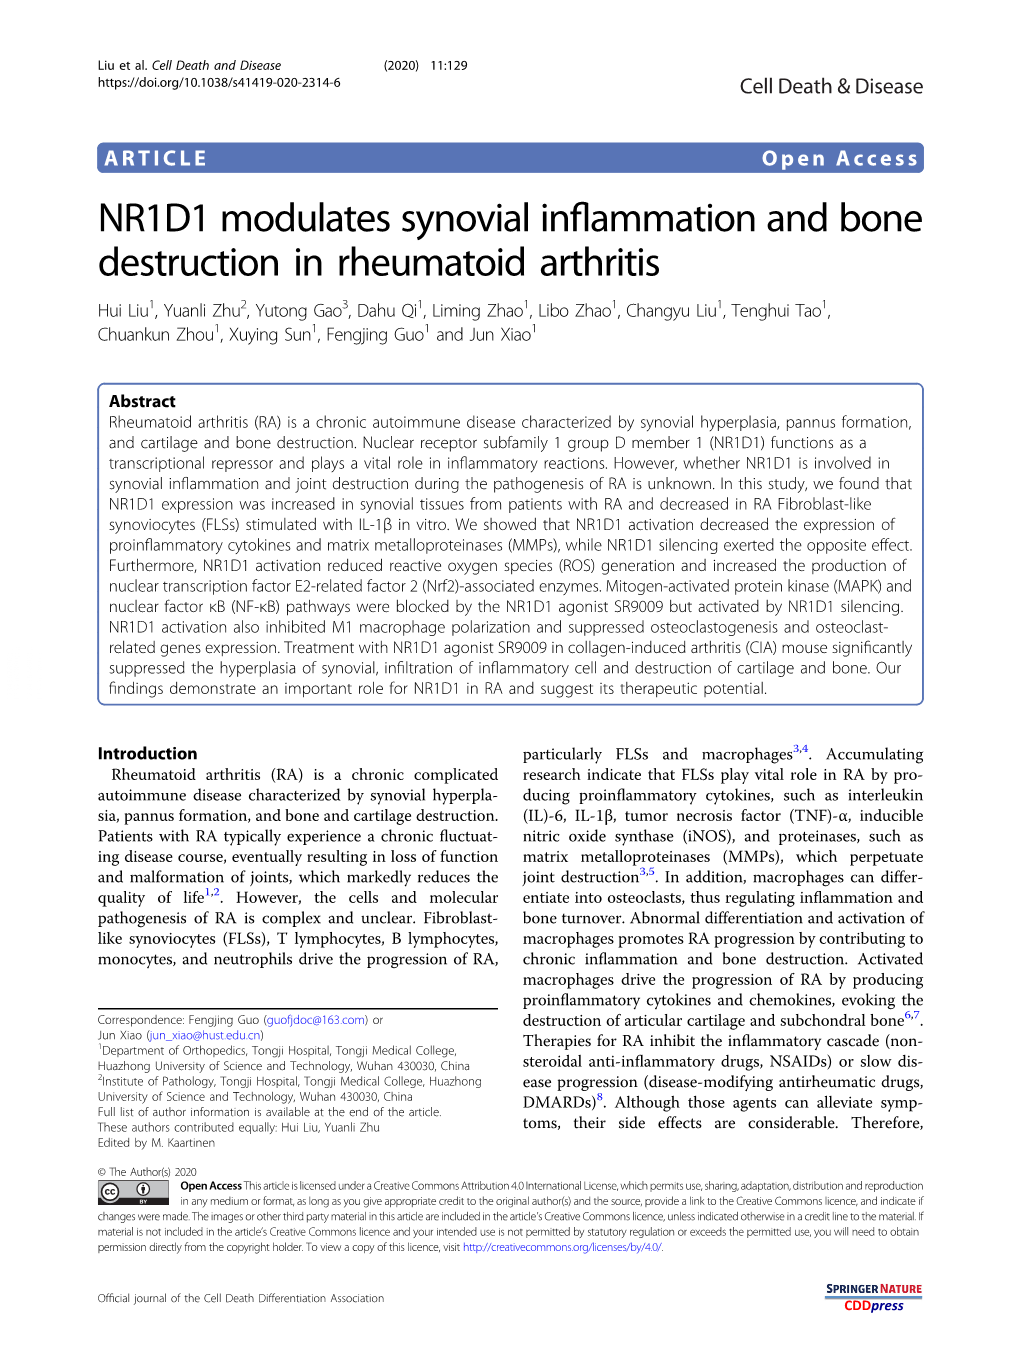 NR1D1 Modulates Synovial Inflammation and Bone Destruction